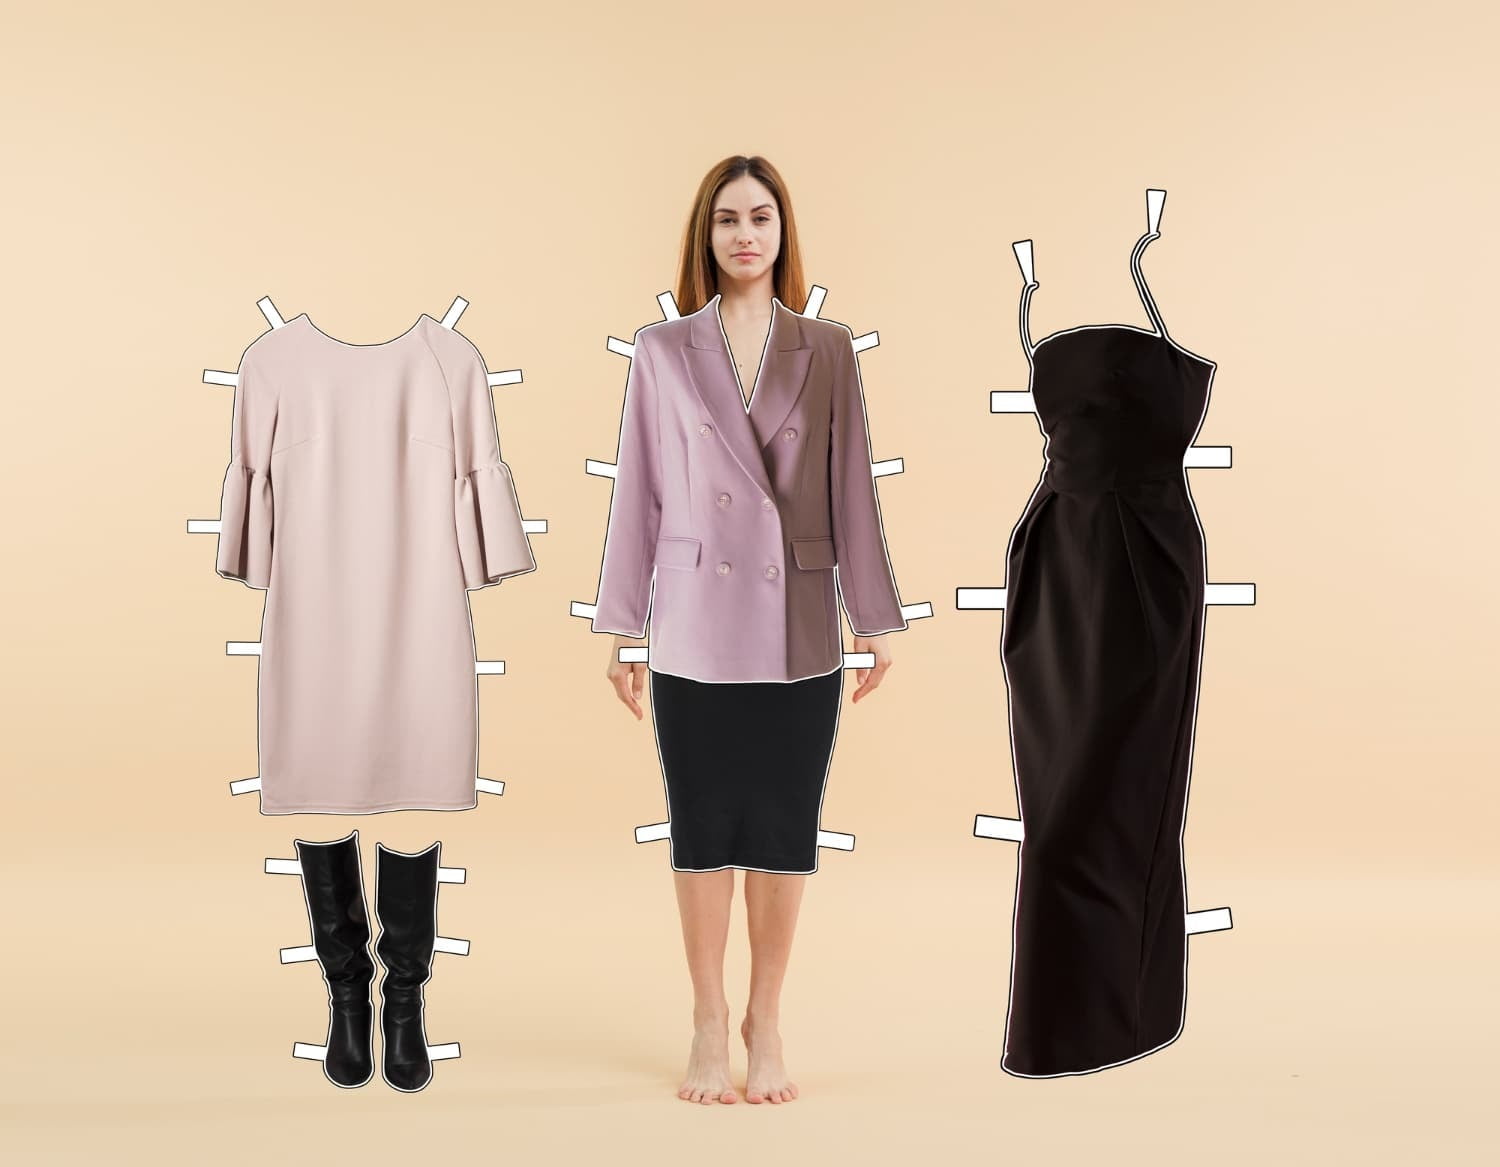 Build a Capsule Wardrobe with Glibzter WOW